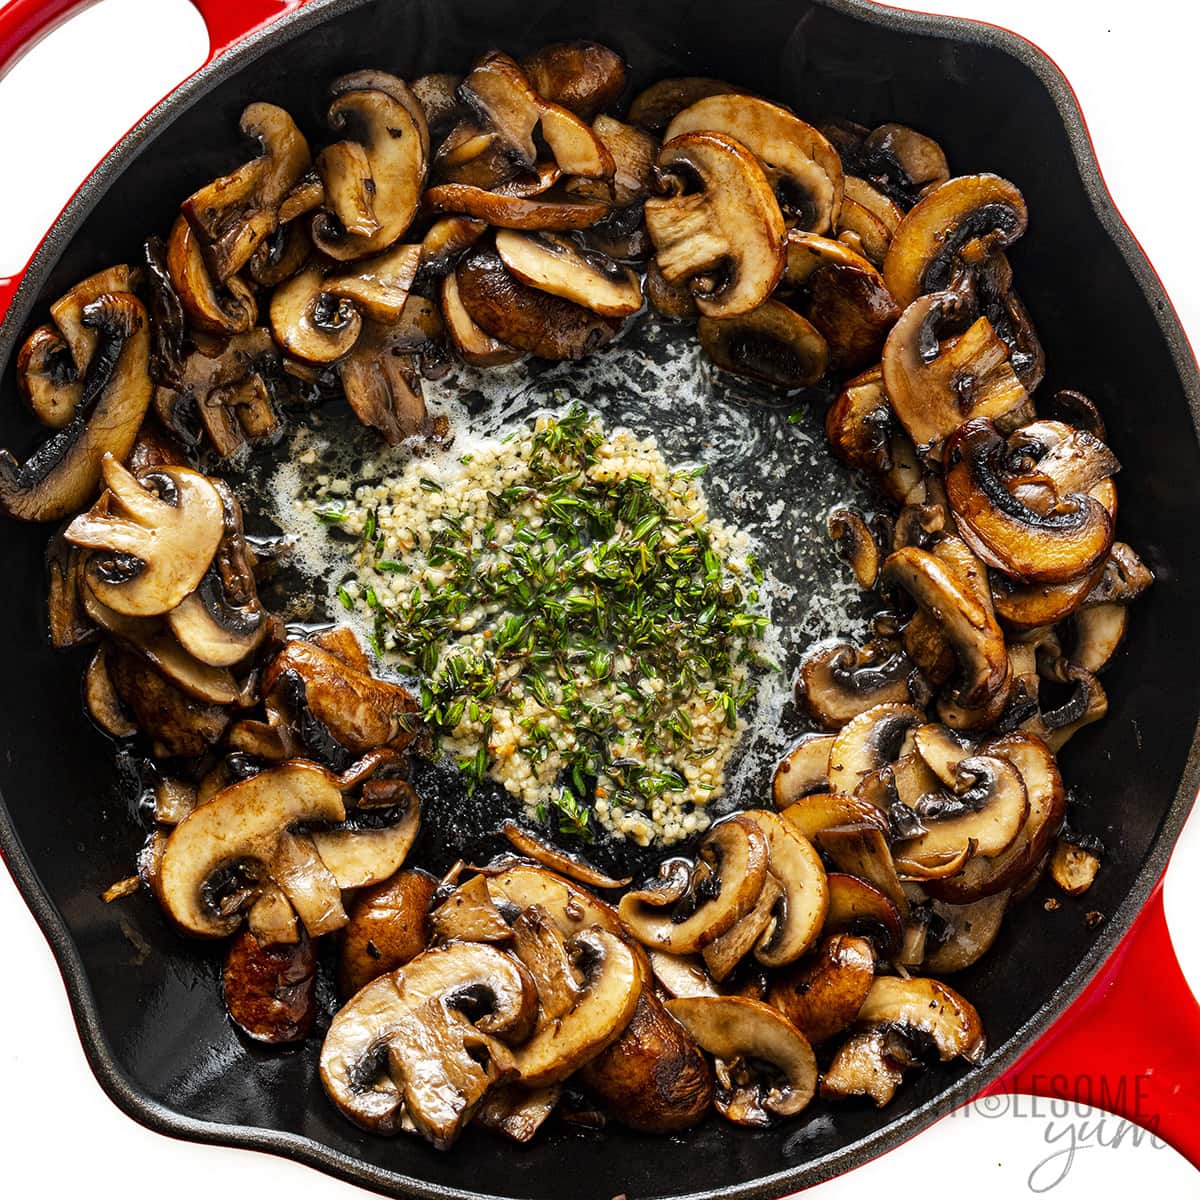 Place in center of skillet with garlic and thyme.